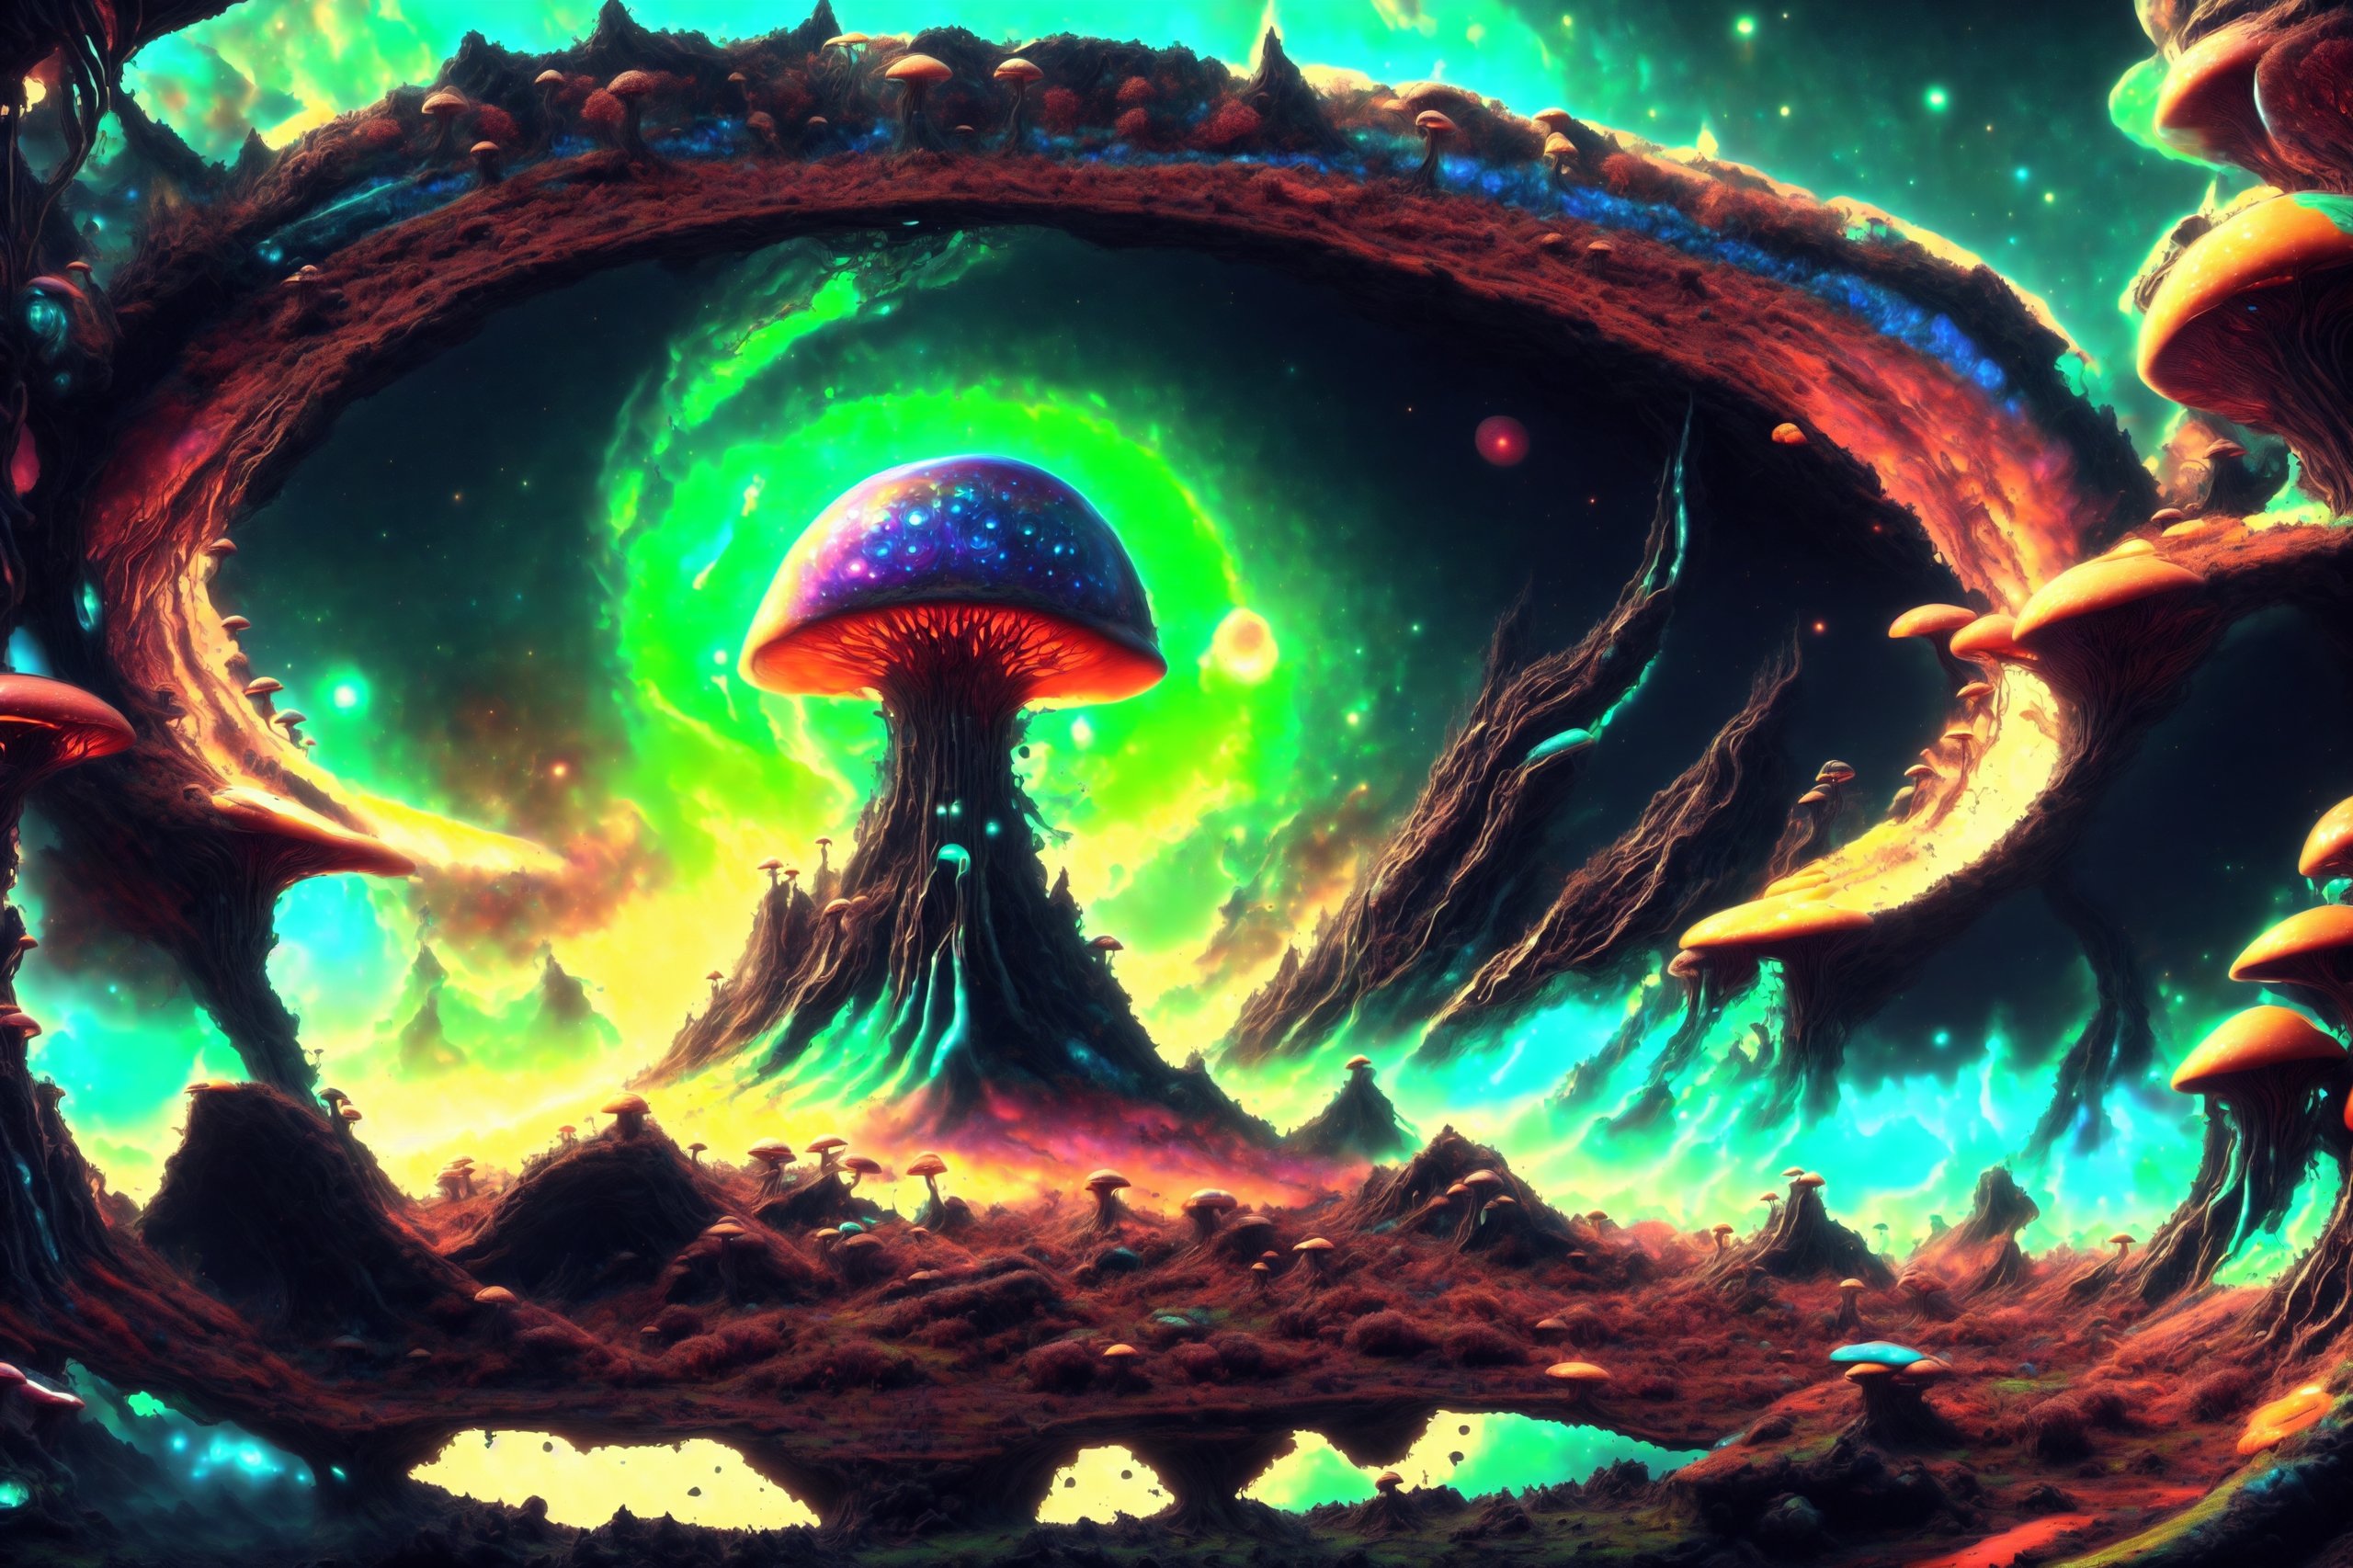 make Zoom-in
8k, PsYKoPaaSkE, Psycodeliceart, mushrooms, LSD blotter, music, glass clouds, psycodelice world, psycodelice color's, 
imaginative, fantasy landscape,  realistic and natural,  cosmic sky,  detailed full-color,  nature,  fantasy, surrealism, magical,  detailed,  gloss,  hyperrealism, surreal building in a landscape,  cosmic sky,  natural light,  full-color,  dreamscape aesthetic,  surreal fantasy building,  hd photography, beautiful,  cosmic,  futuristic,  detailed,  iridescent,  vibrant,  digital painting,  hyperrealism, watercolor, psychedeliccolorful world